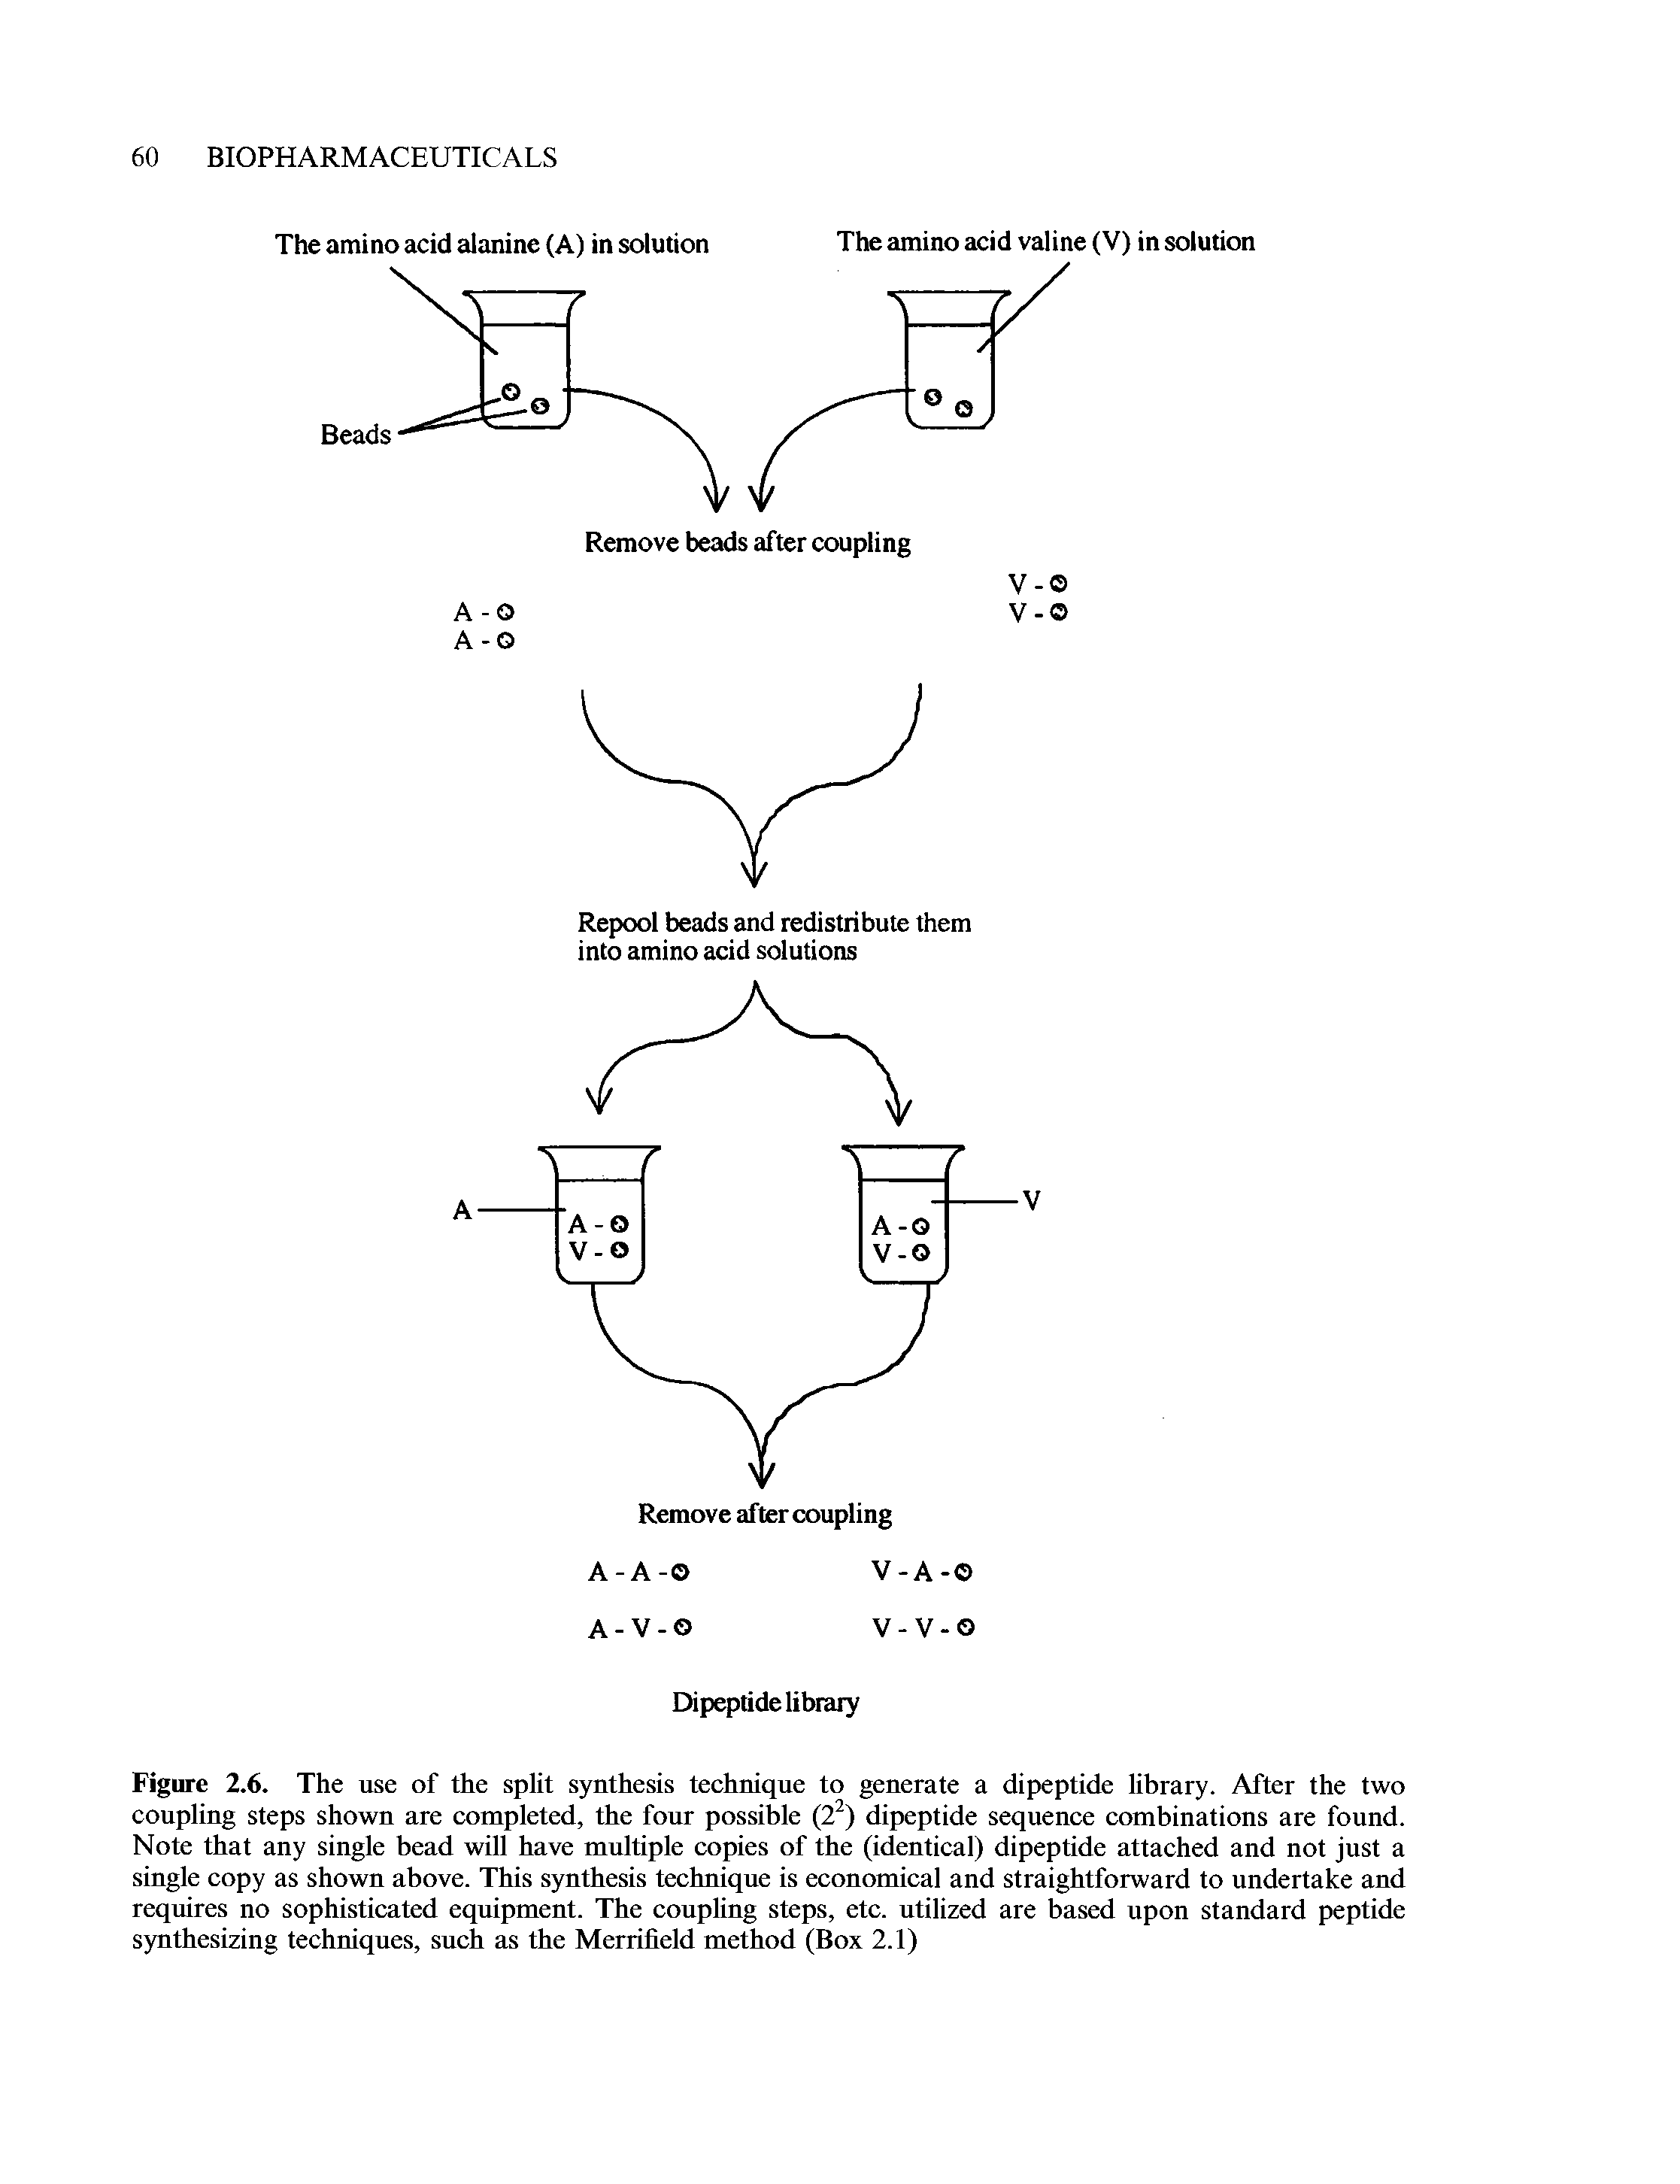 Figure 2.6. The use of the split synthesis technique to generate a dipeptide library. After the two coupling steps shown are completed, the four possible (2 ) dipeptide sequence combinations are found. Note that any single bead will have multiple copies of the (identical) dipeptide attached and not just a single copy as shown above. This synthesis technique is economical and straightforward to undertake and requires no sophisticated equipment. The coupling steps, etc. utilized are based upon standard peptide S5mthesizing techniques, such as the Merrilield method (Box 2.1)...